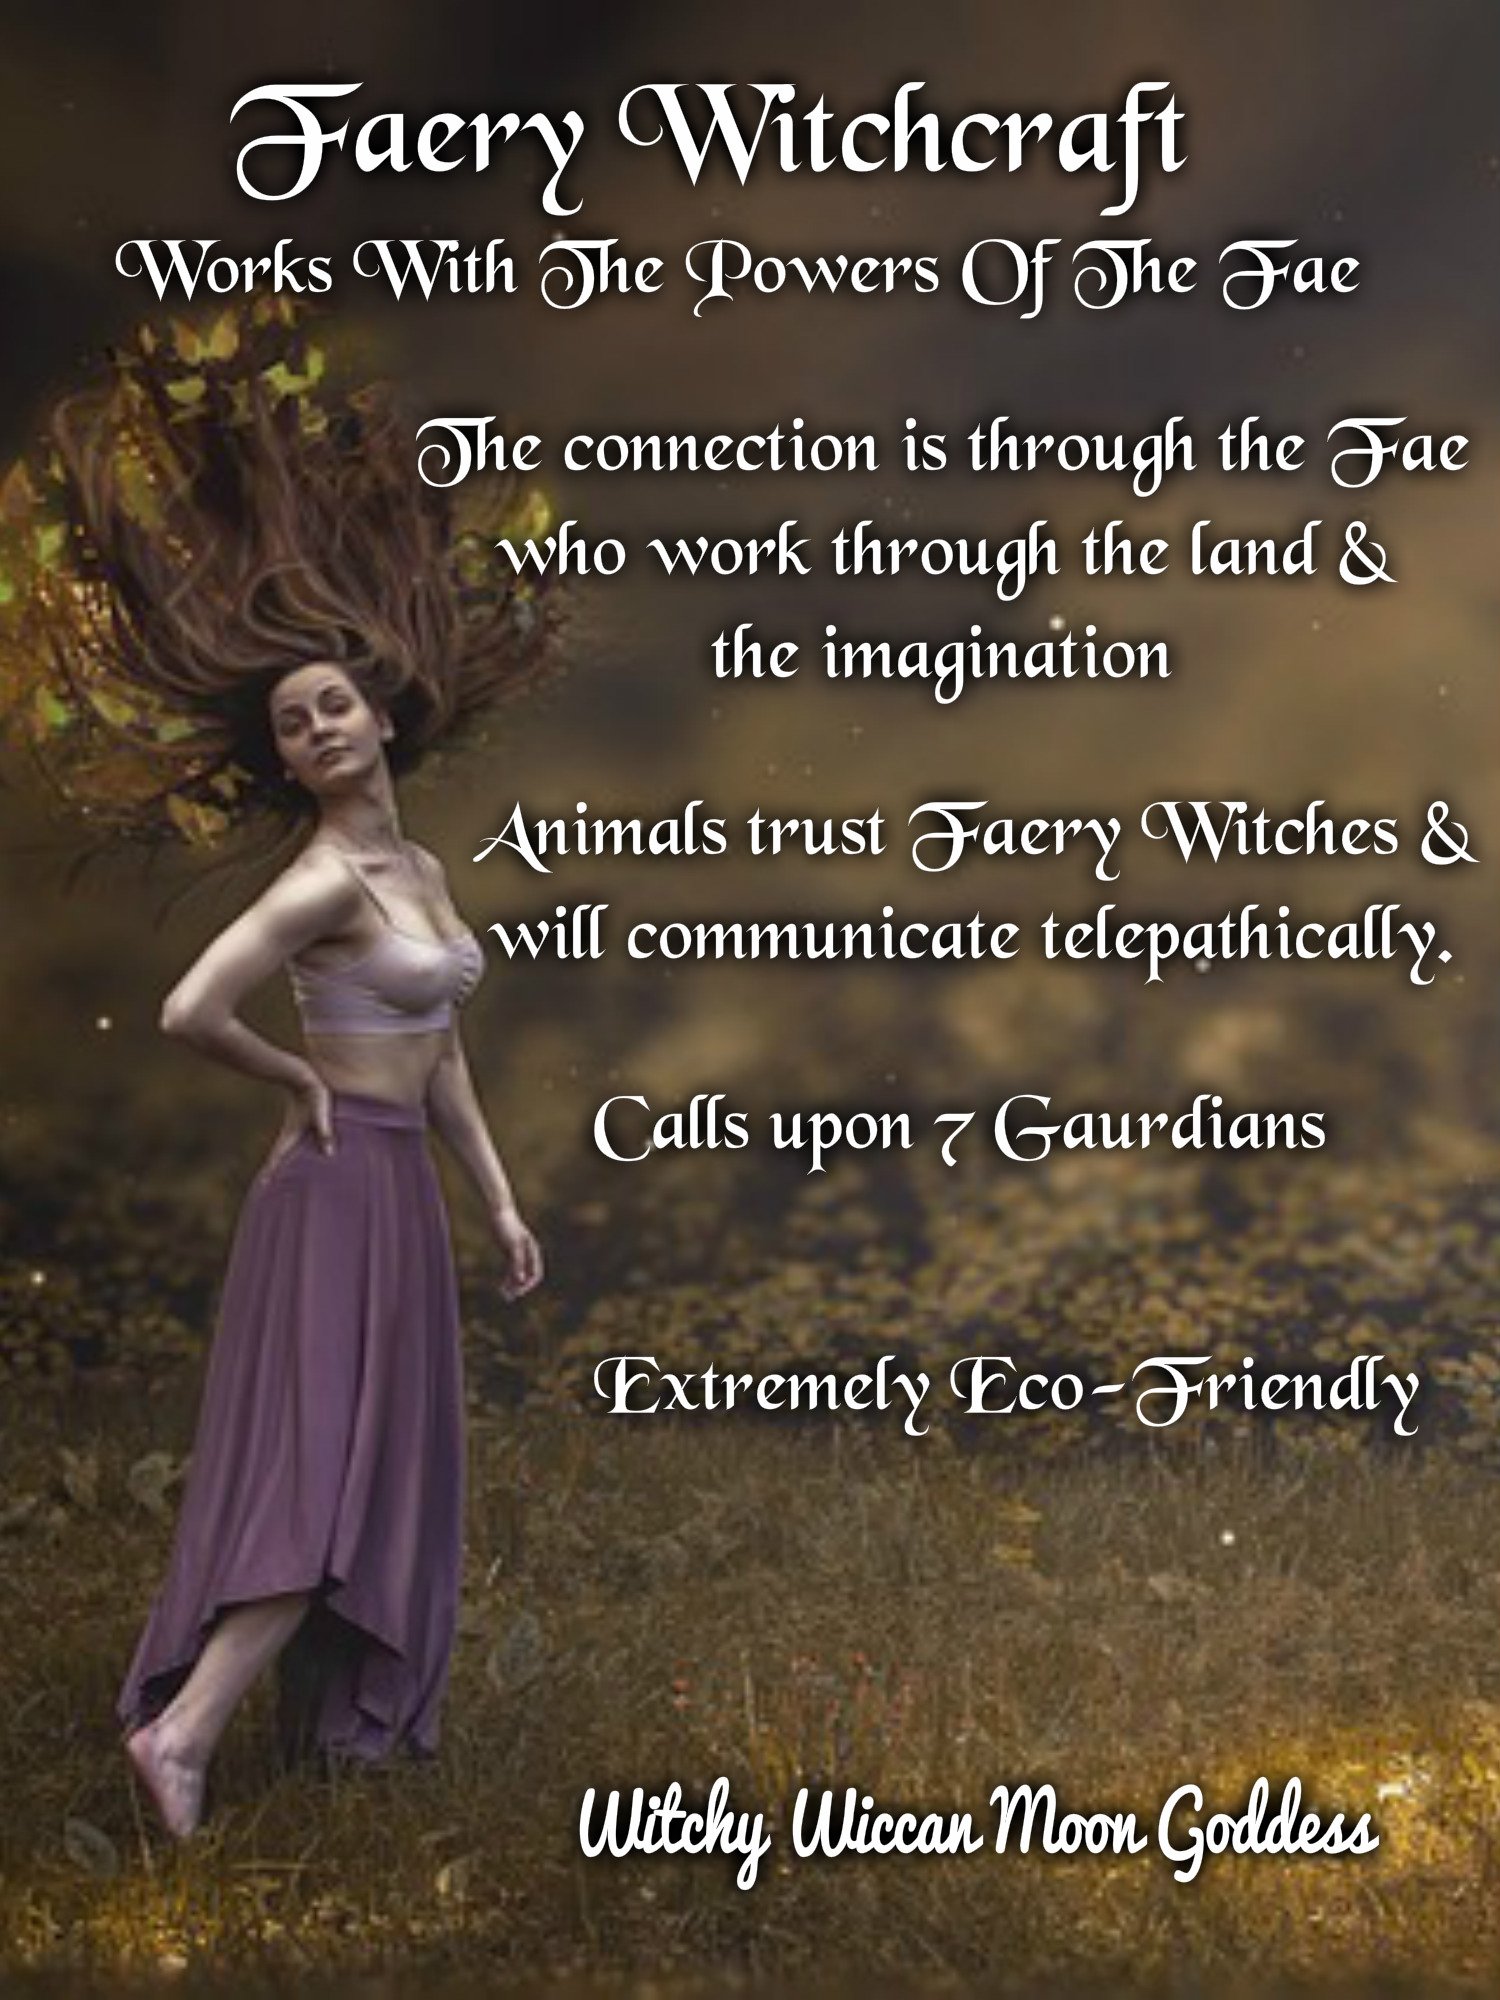 Faery Witchcraft: Works with the powers of the Fae. The connection is through the Fae who work through the land & imagination. Animals trust Faery Witches and will communicate telepathically. Calls upon 7 gaurdians. Extremely Eco-Friendly.